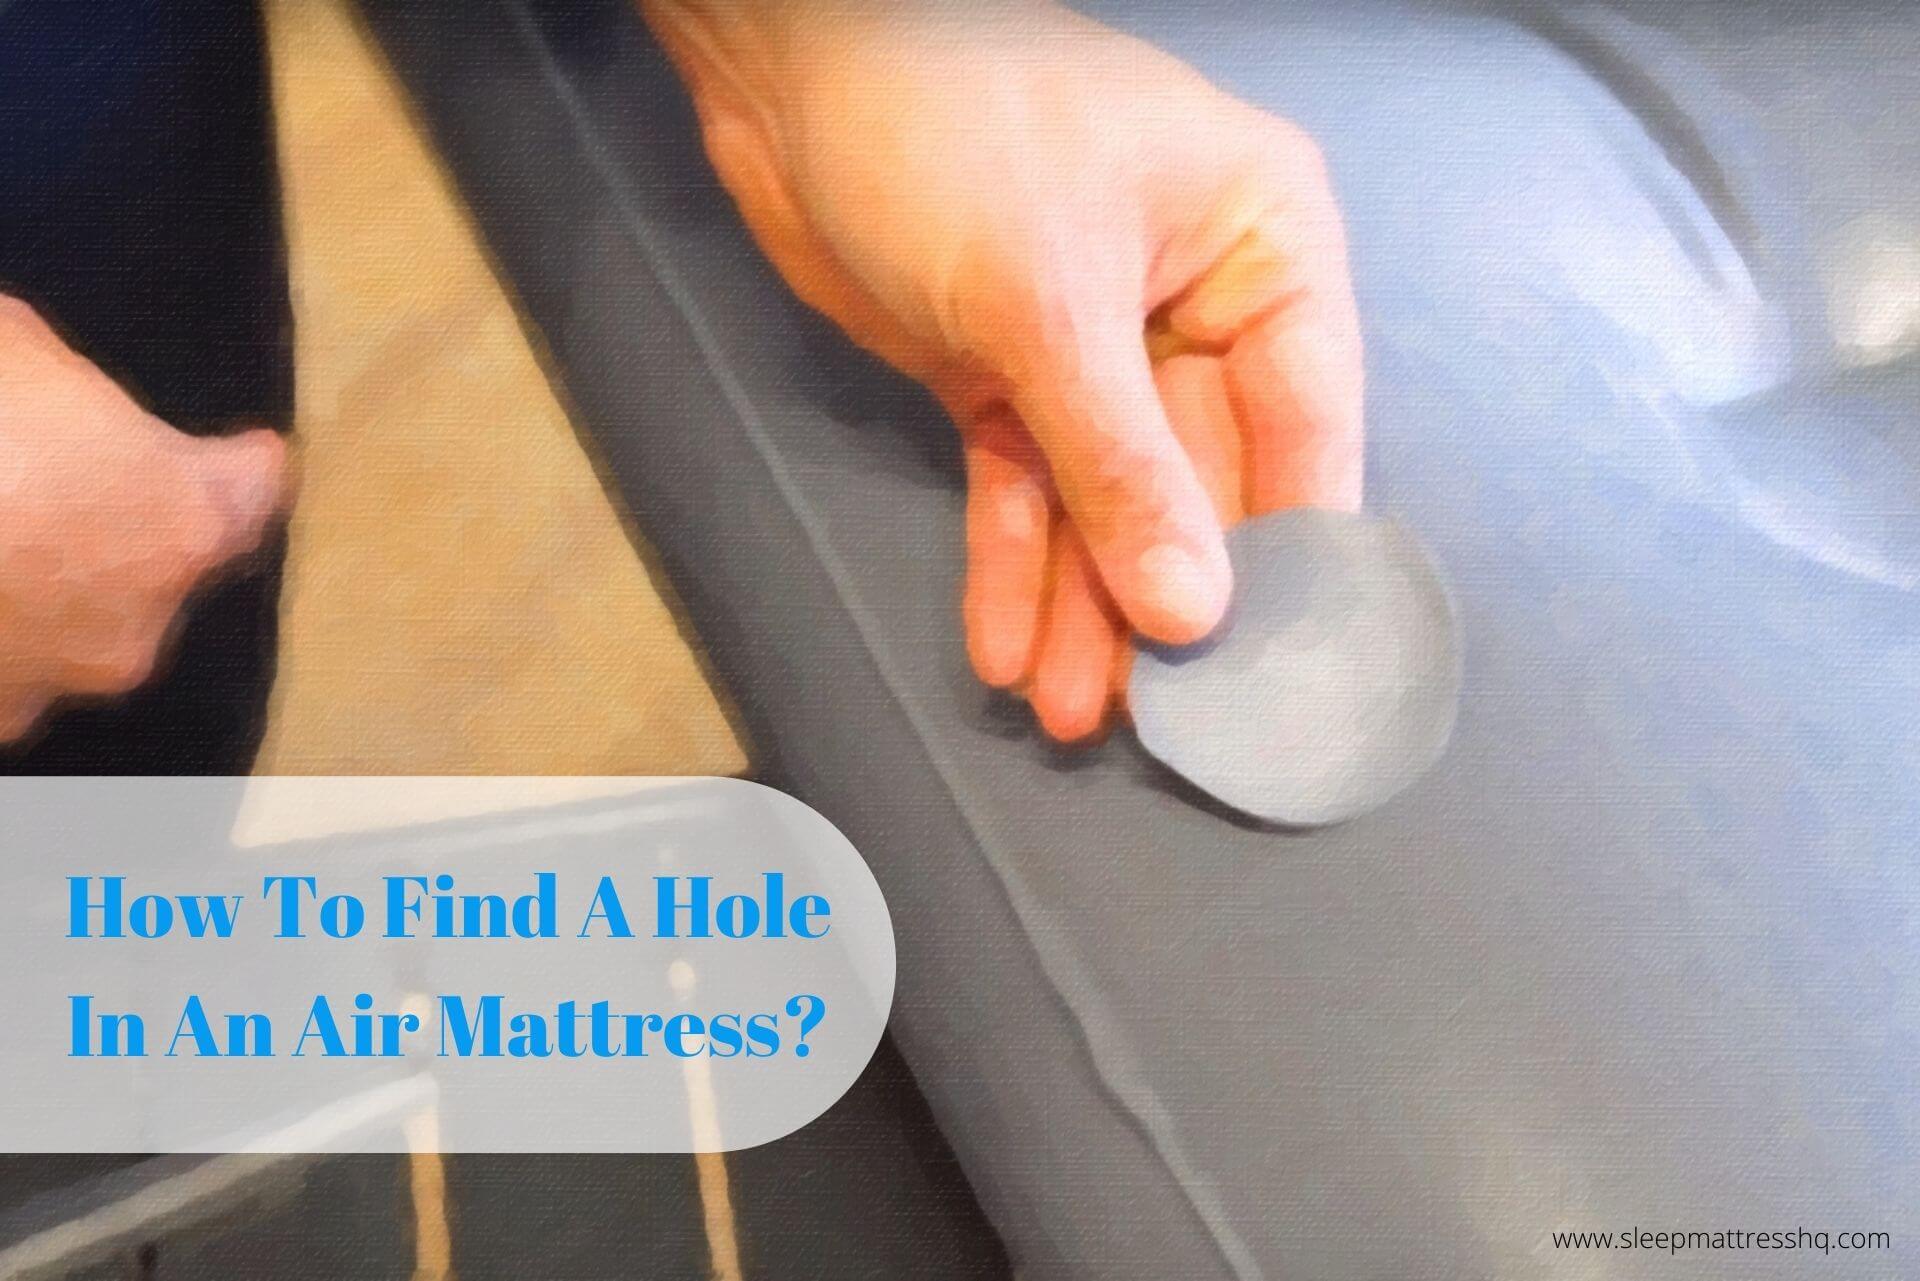 How To Find A Hole In An Air Mattress & Patch the Air